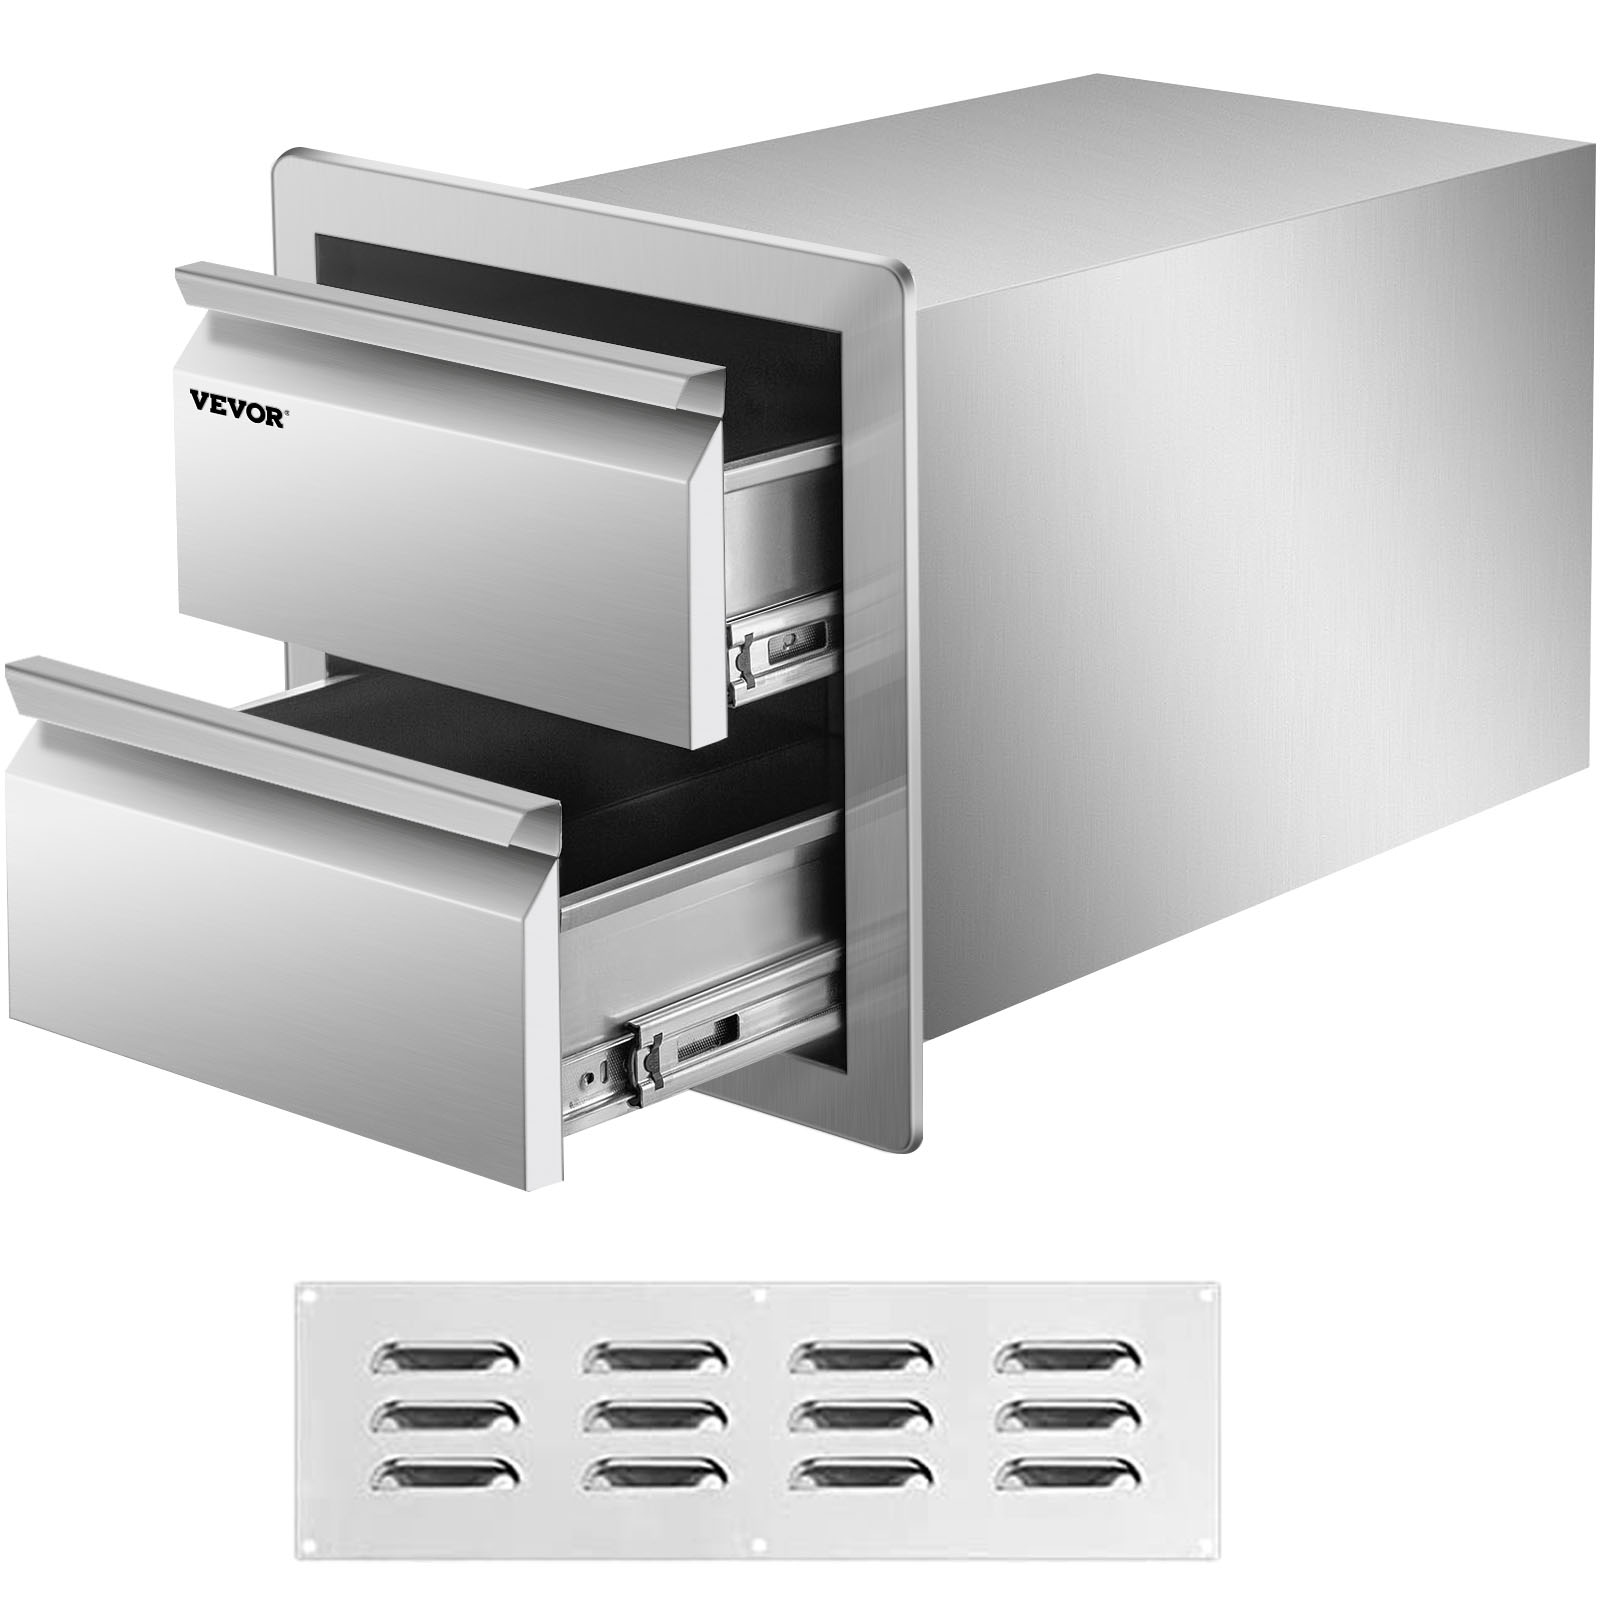 Outdoor Kitchen Bbq Island Drawers Stainless Steel 14"wx15"h Kitchen Cabinet от Vevor Many GEOs